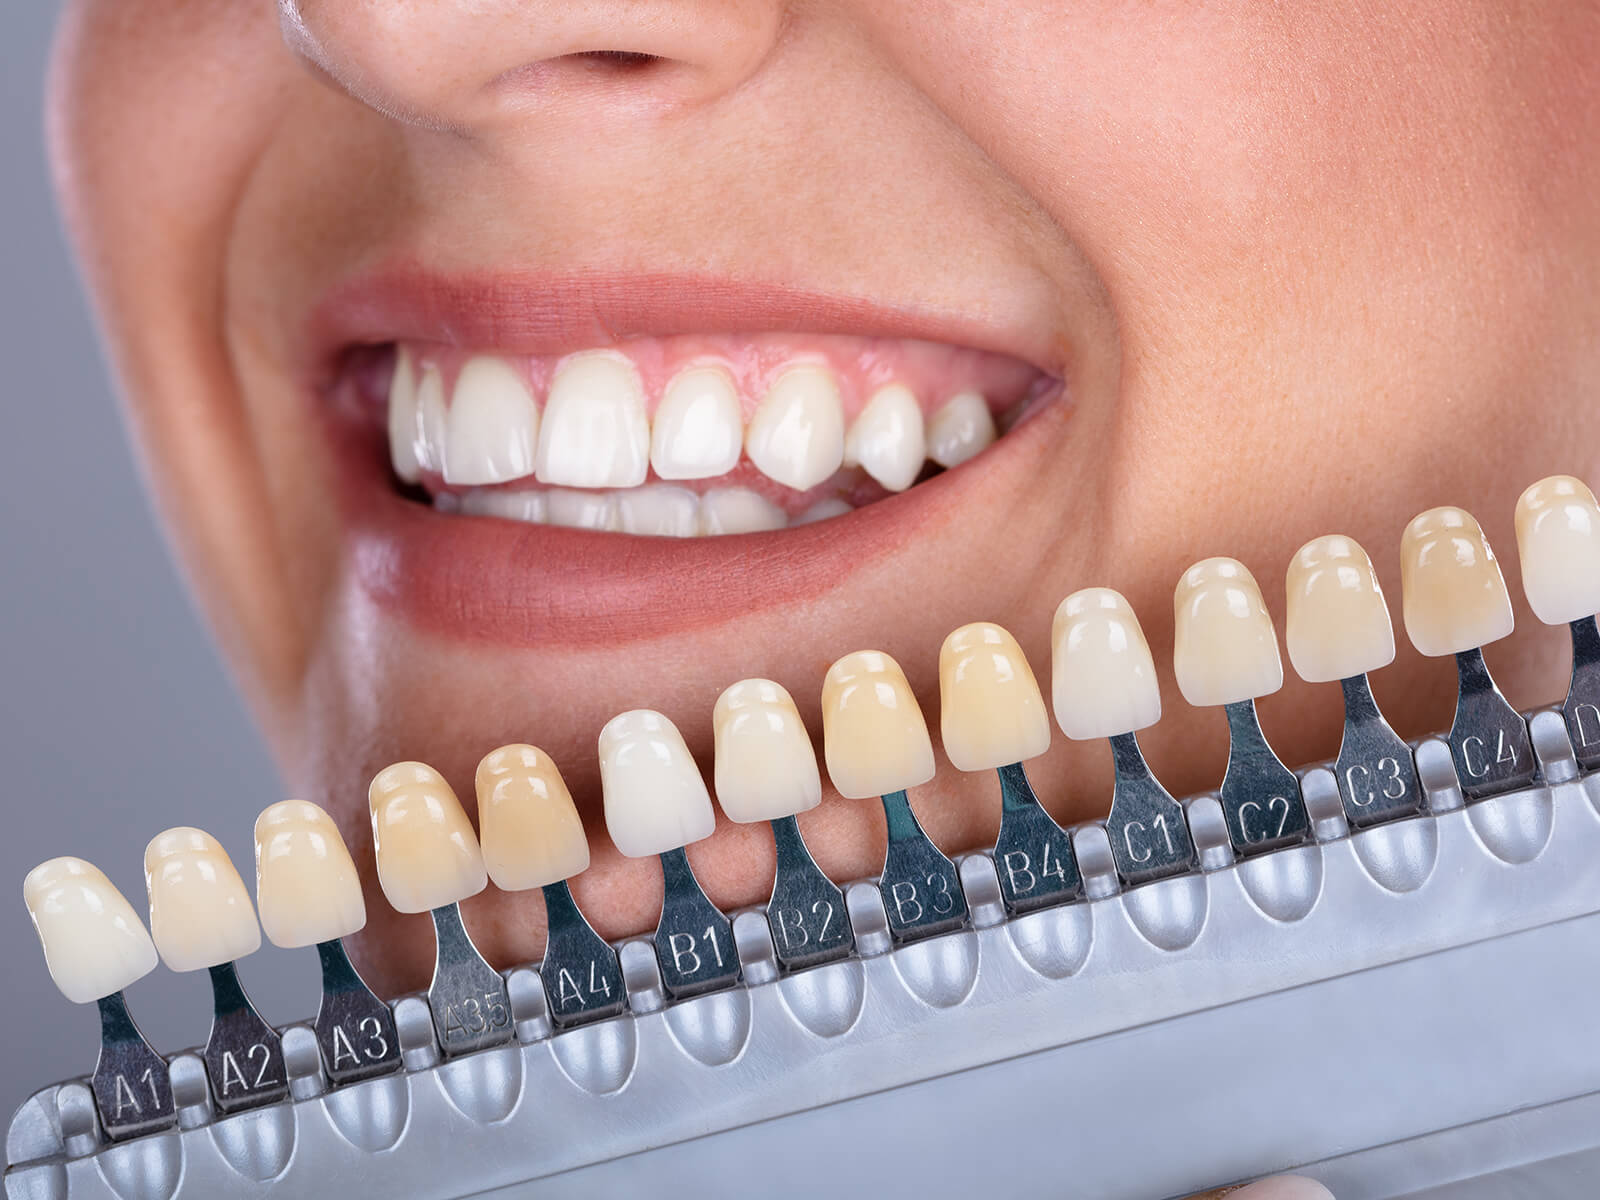 What You Need To Know Before Getting A Teeth Whitening Treatment